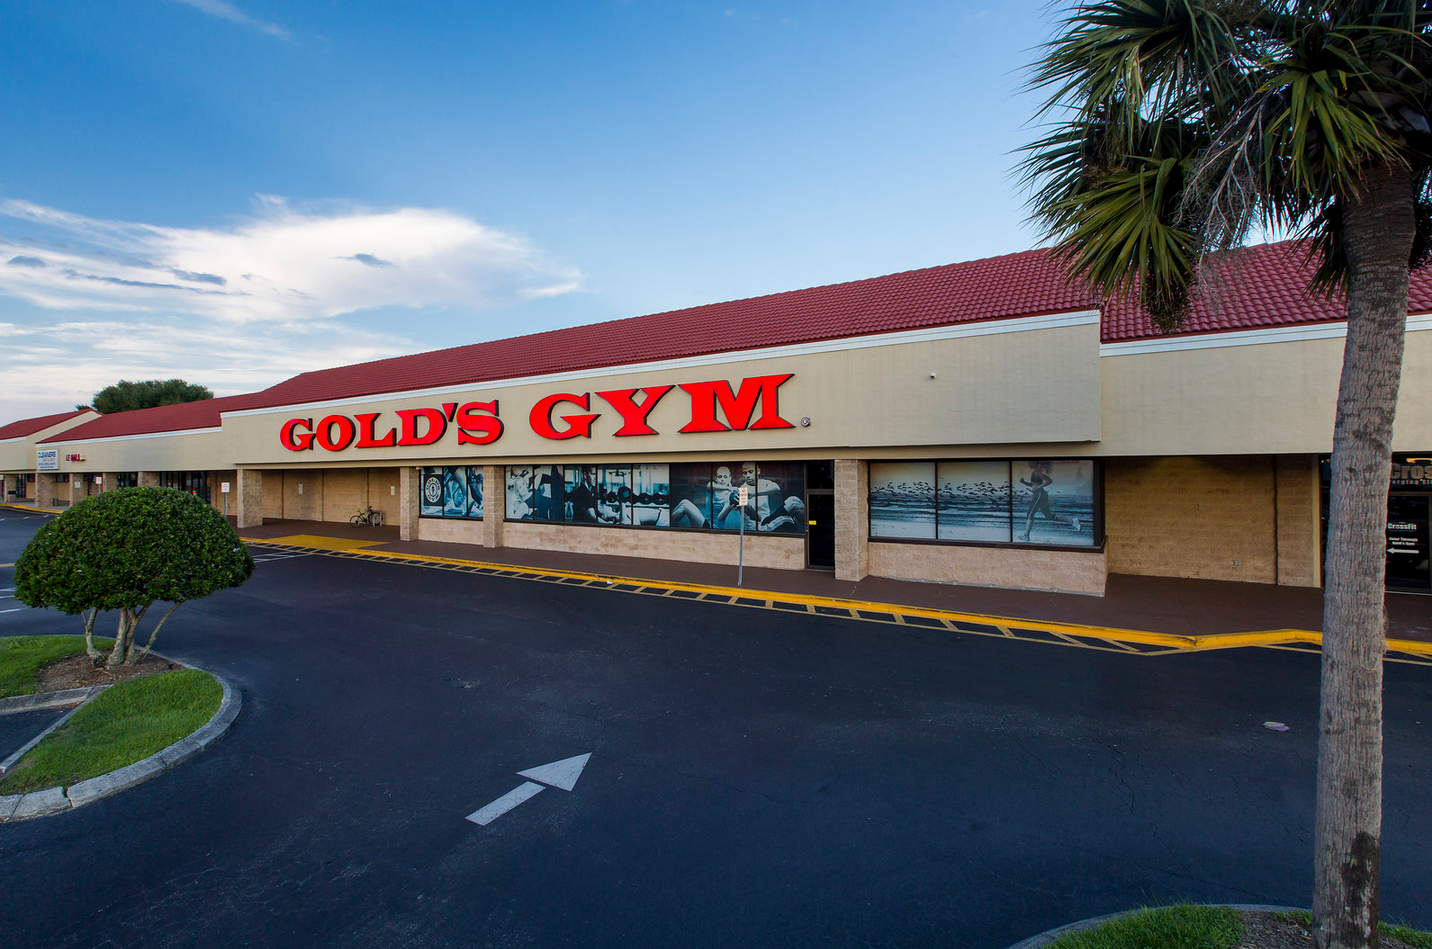 golds gym new years resolutioners